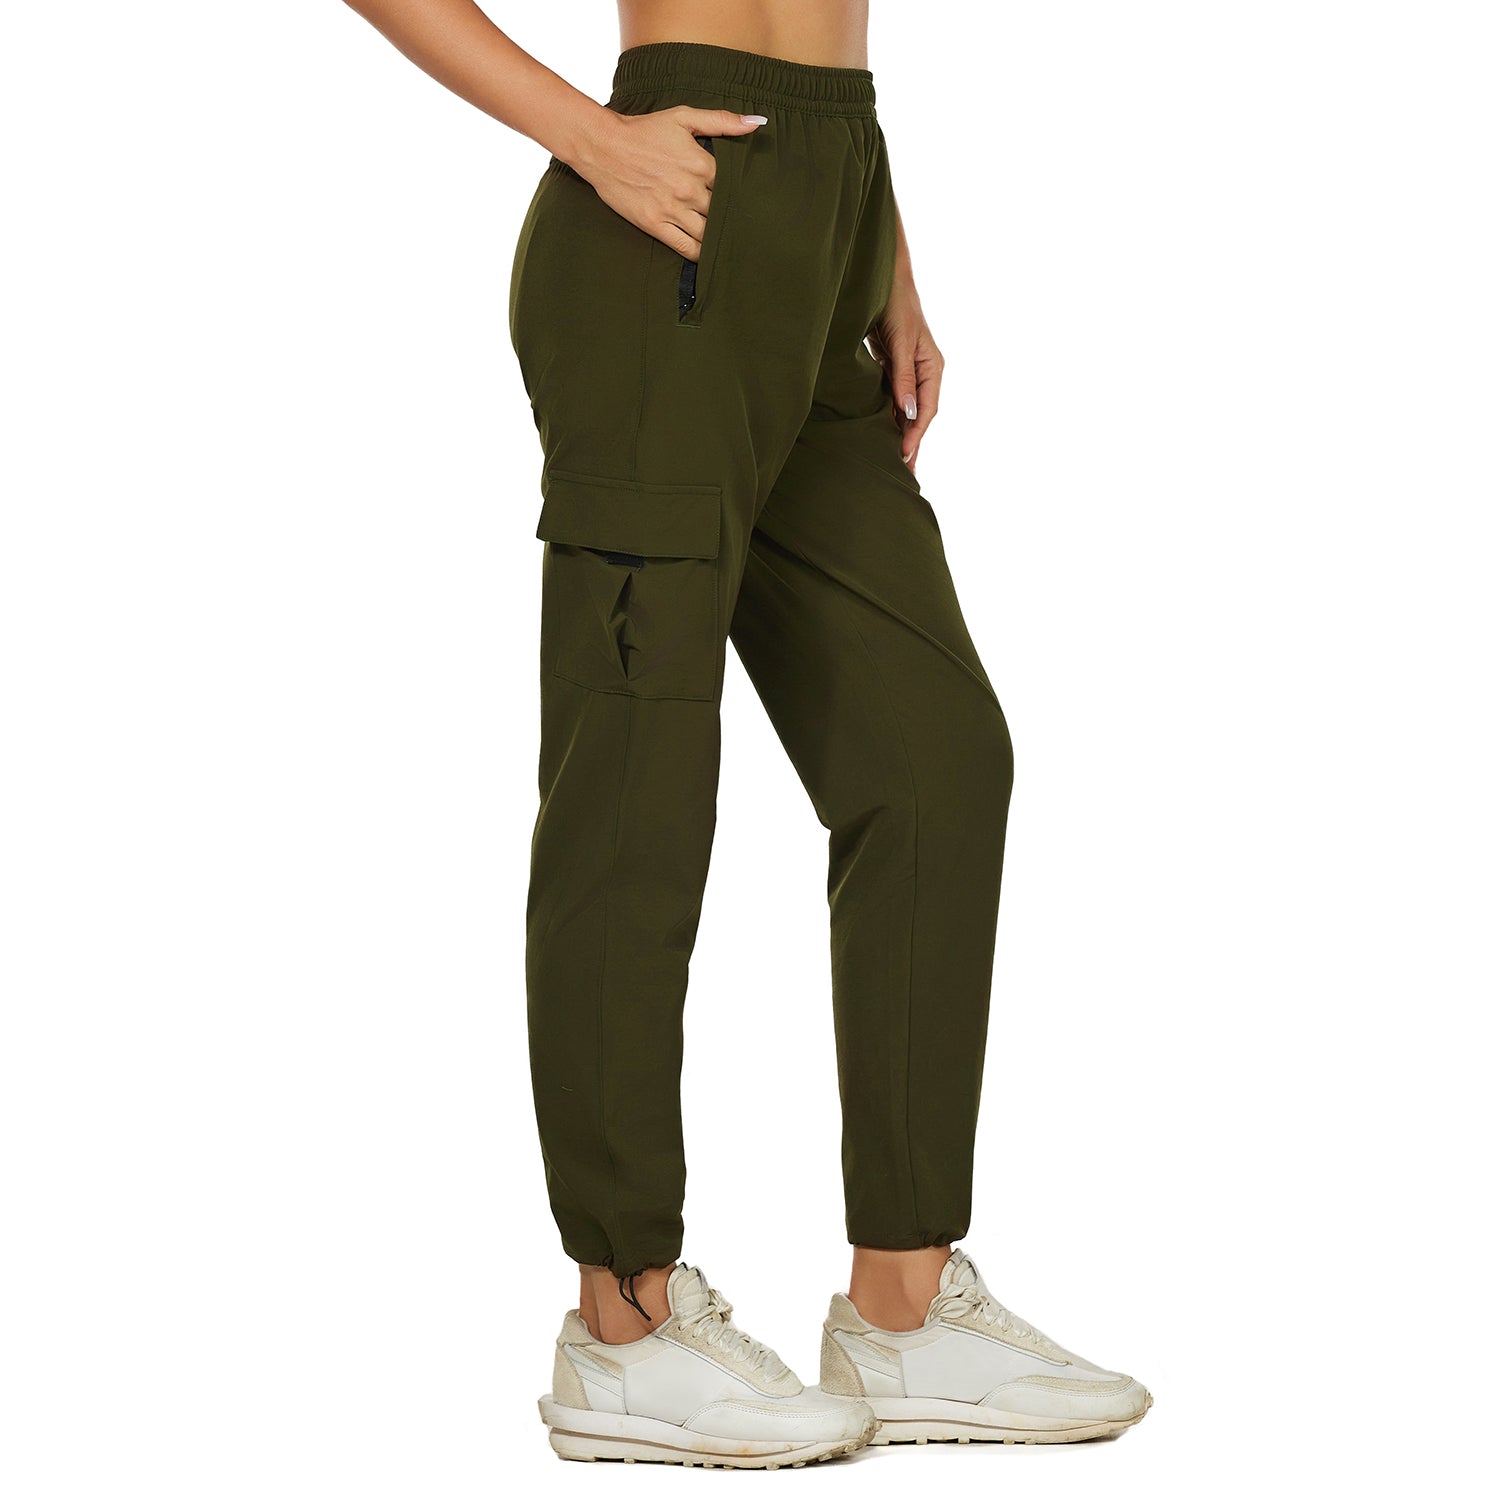 Lululemon athletica Cargo High-Rise Lined Hiking Pant | Women's Trousers |  The Summit at Fritz Farm